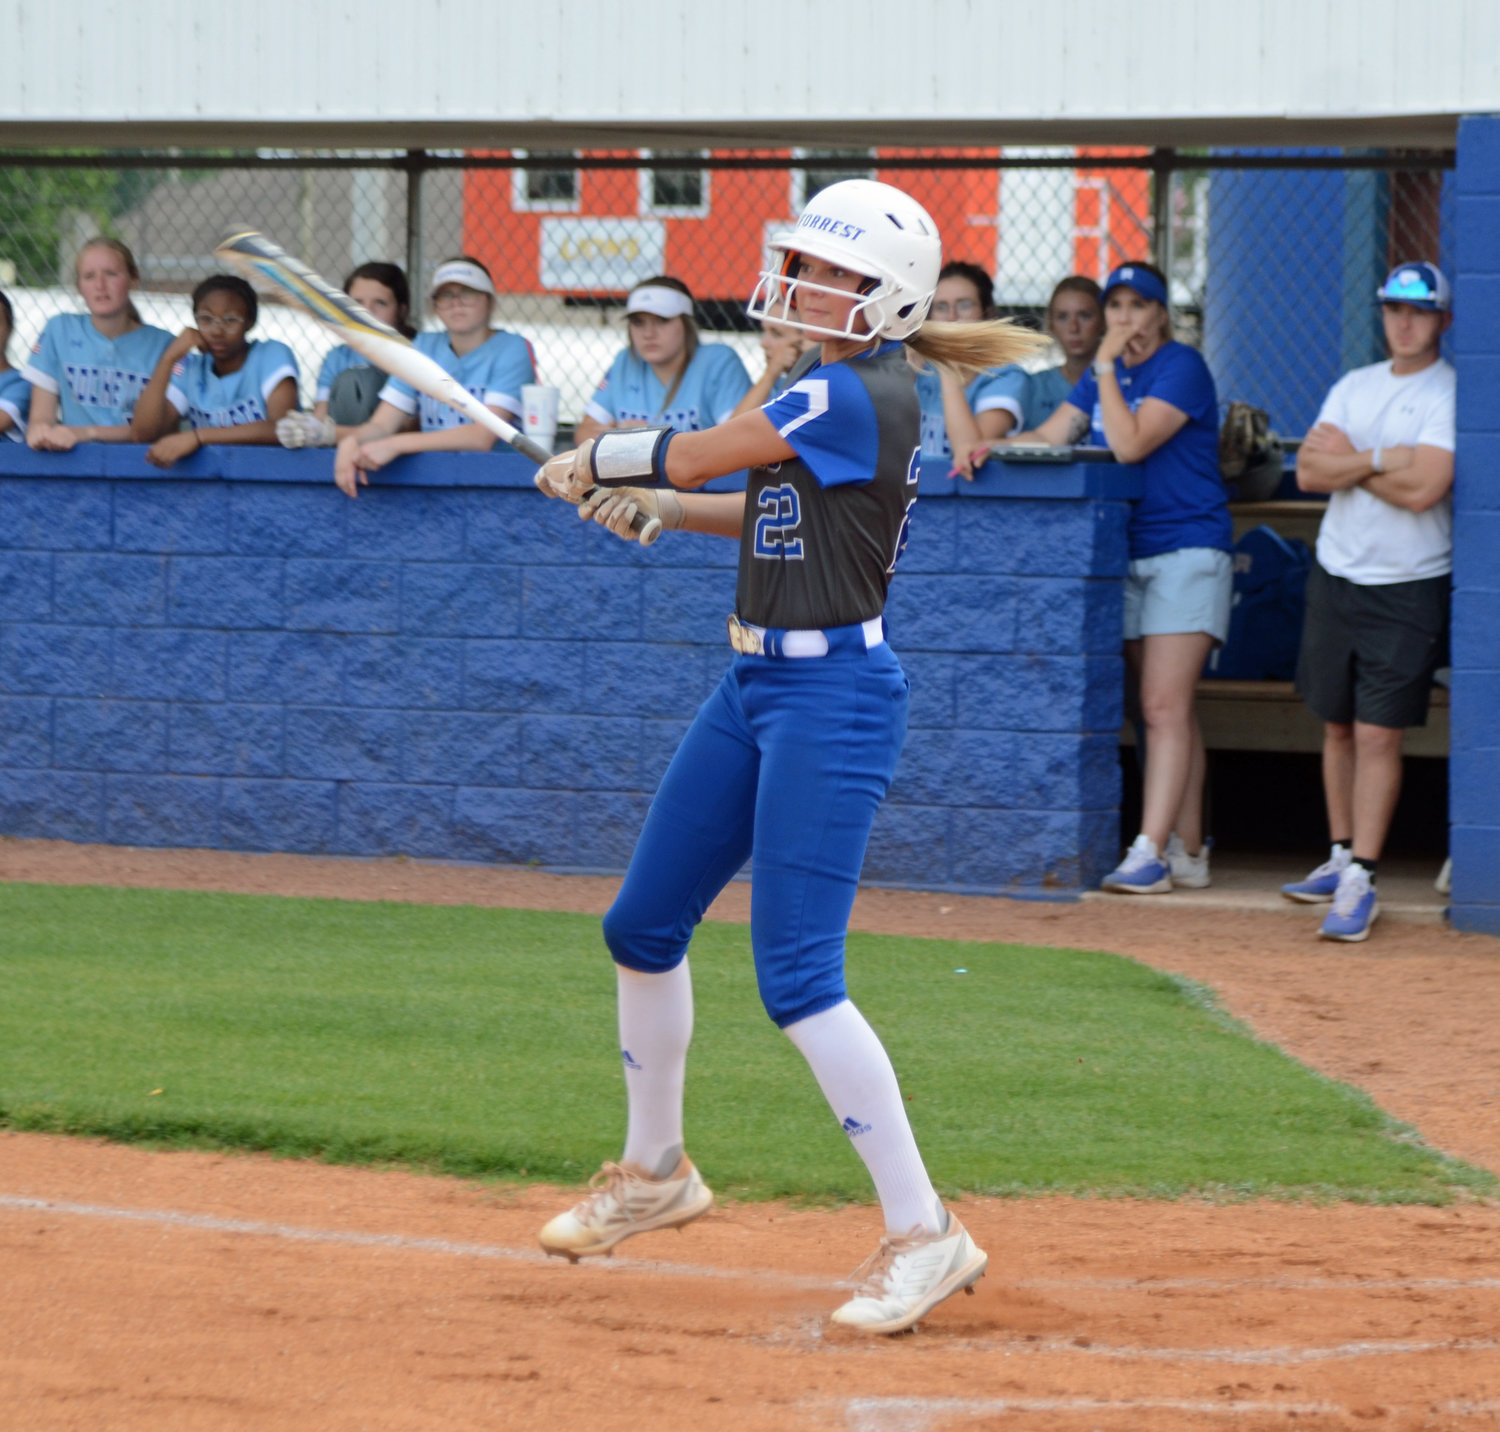 Macyn Kirby is 14-for-22 with 12 runs scored in the last six games for the Lady Rockets, who take on Grundy County Monday at Forrest in the first round of the District 7-AA Tournament.